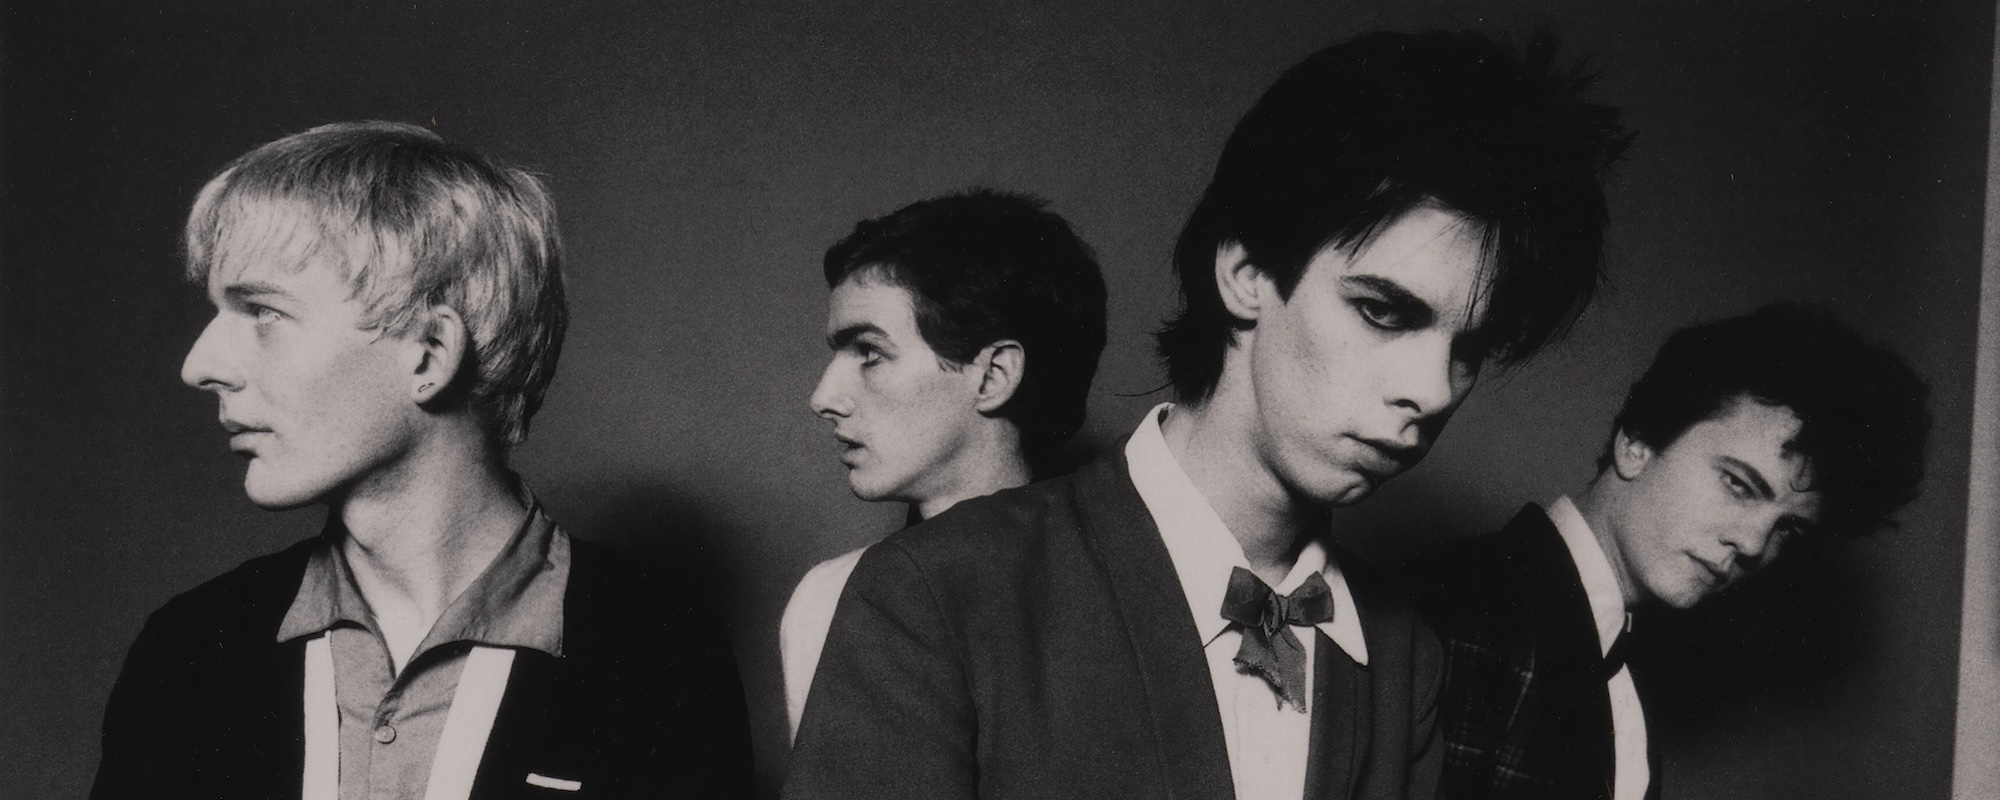 Watch: First Authorized Documentary on Nick Cave’s Early Post-Punk Band Birthday Party